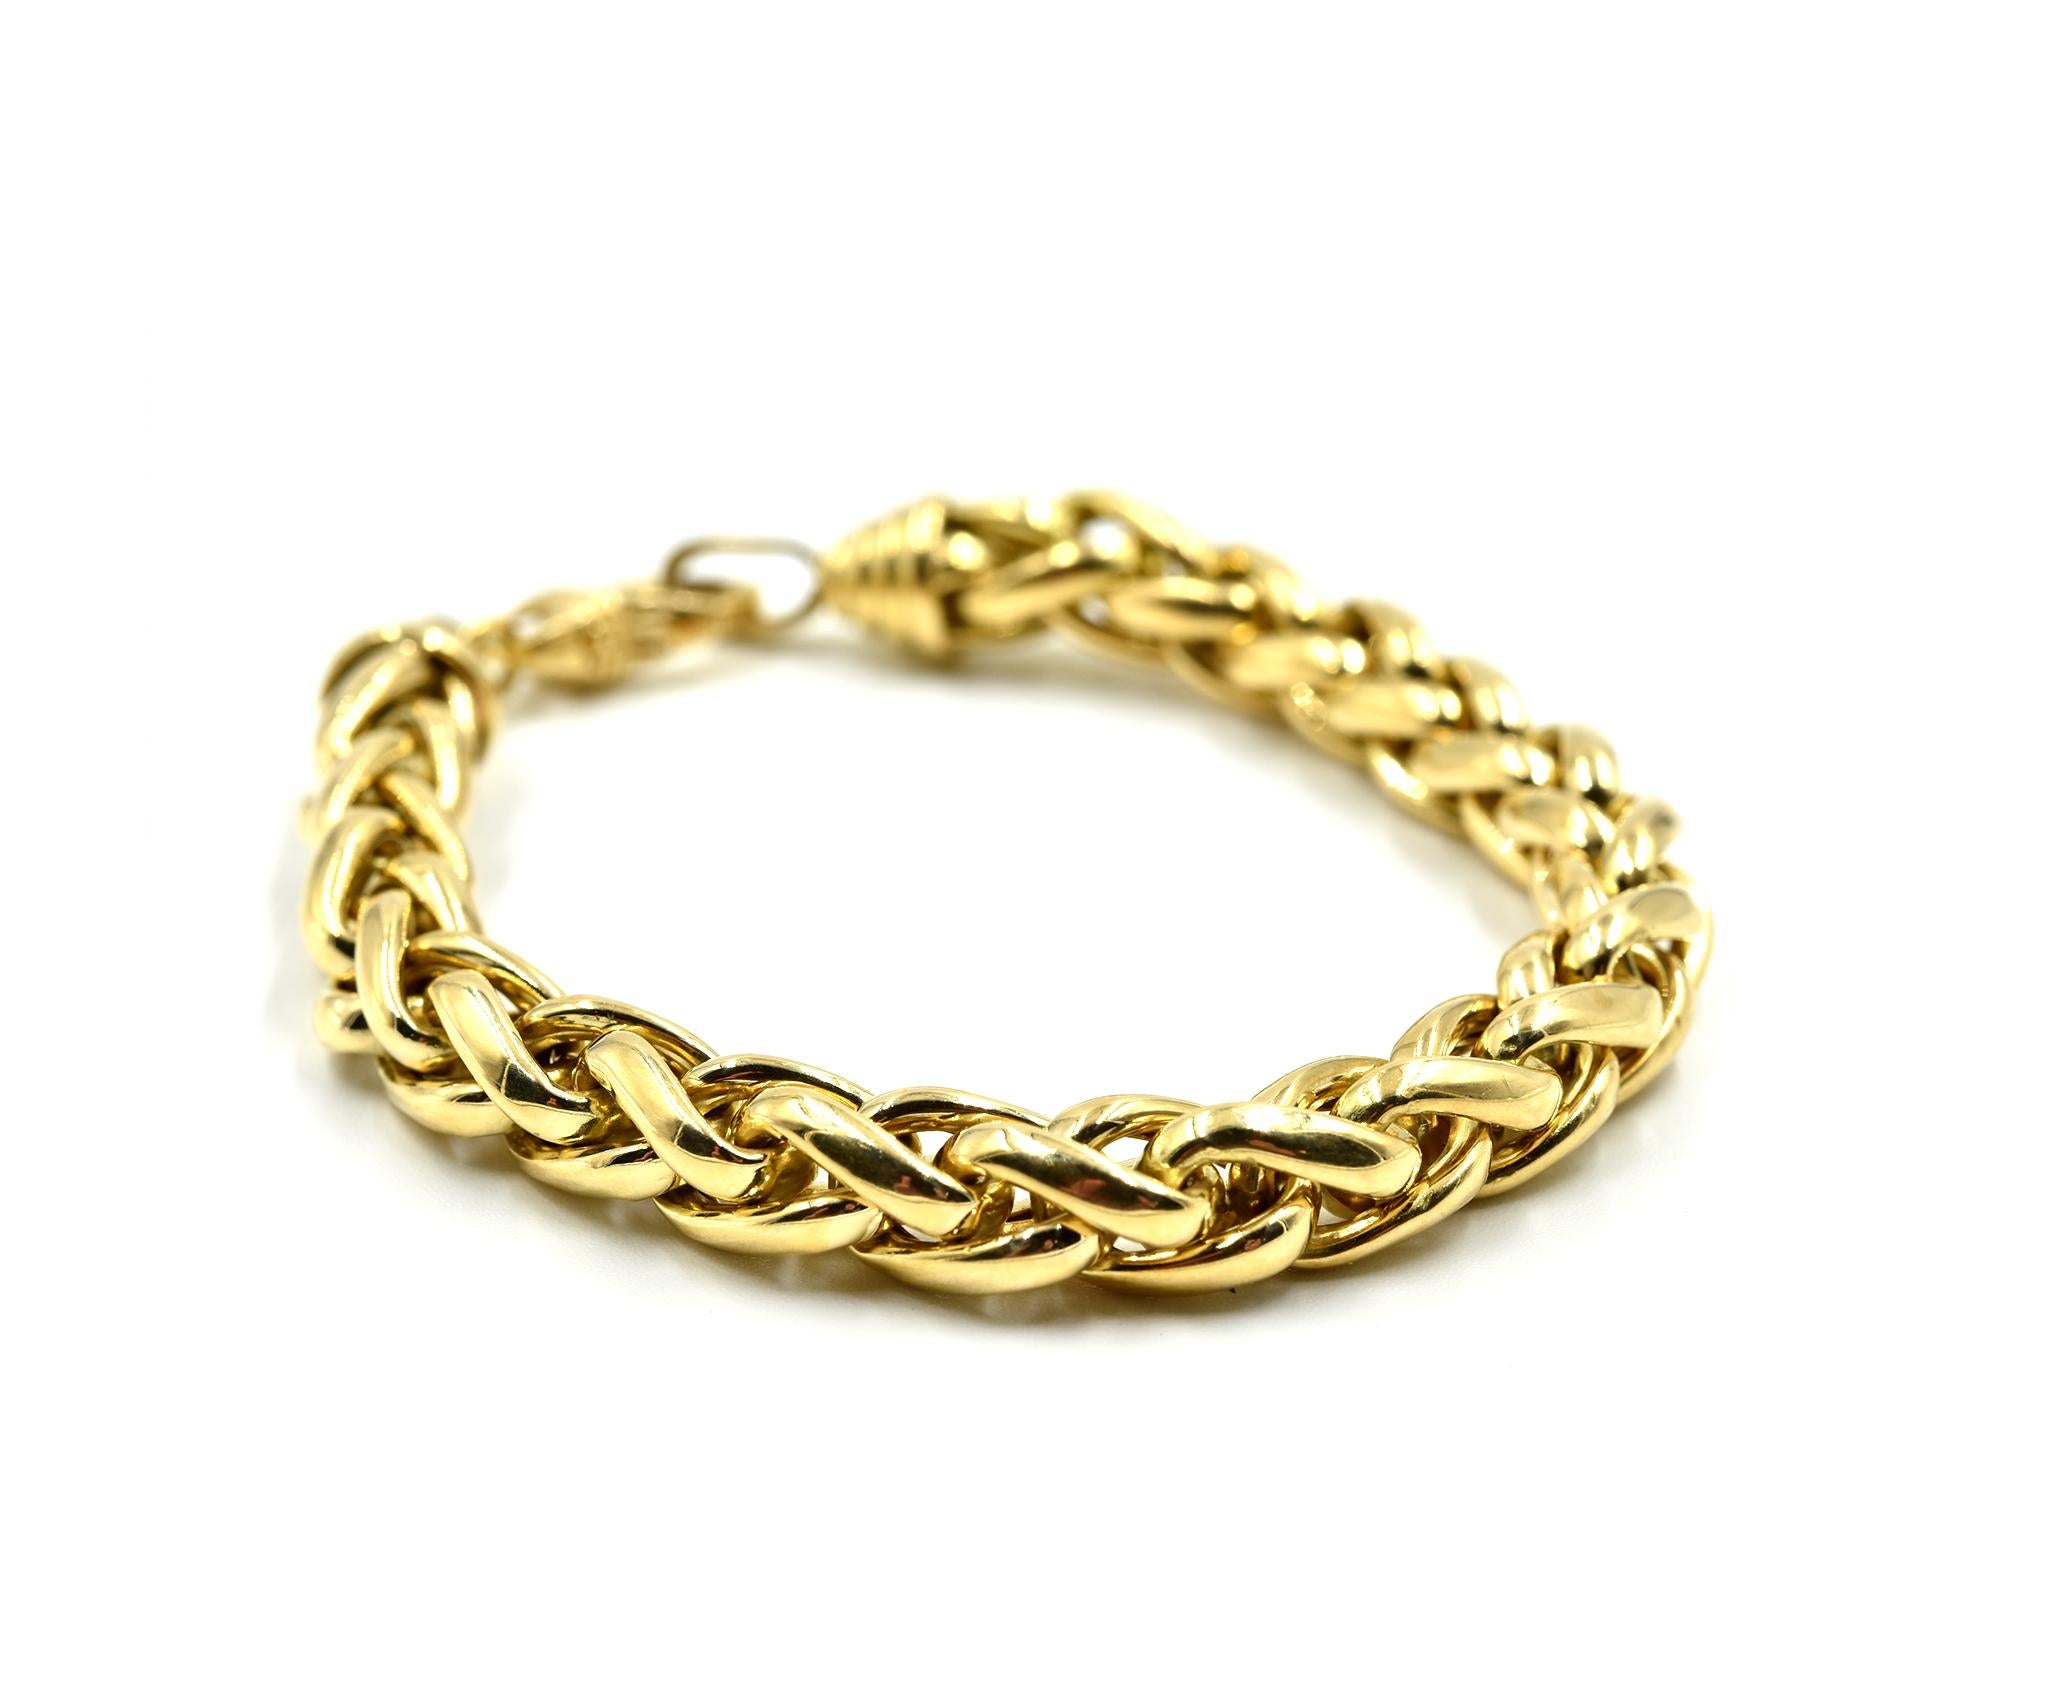 Designer: custom design
Material: 18k yellow gold
Dimensions: bracelet measures 7 3/4-inch long and 1/4-inch wide
Weight: 24.92 grams
